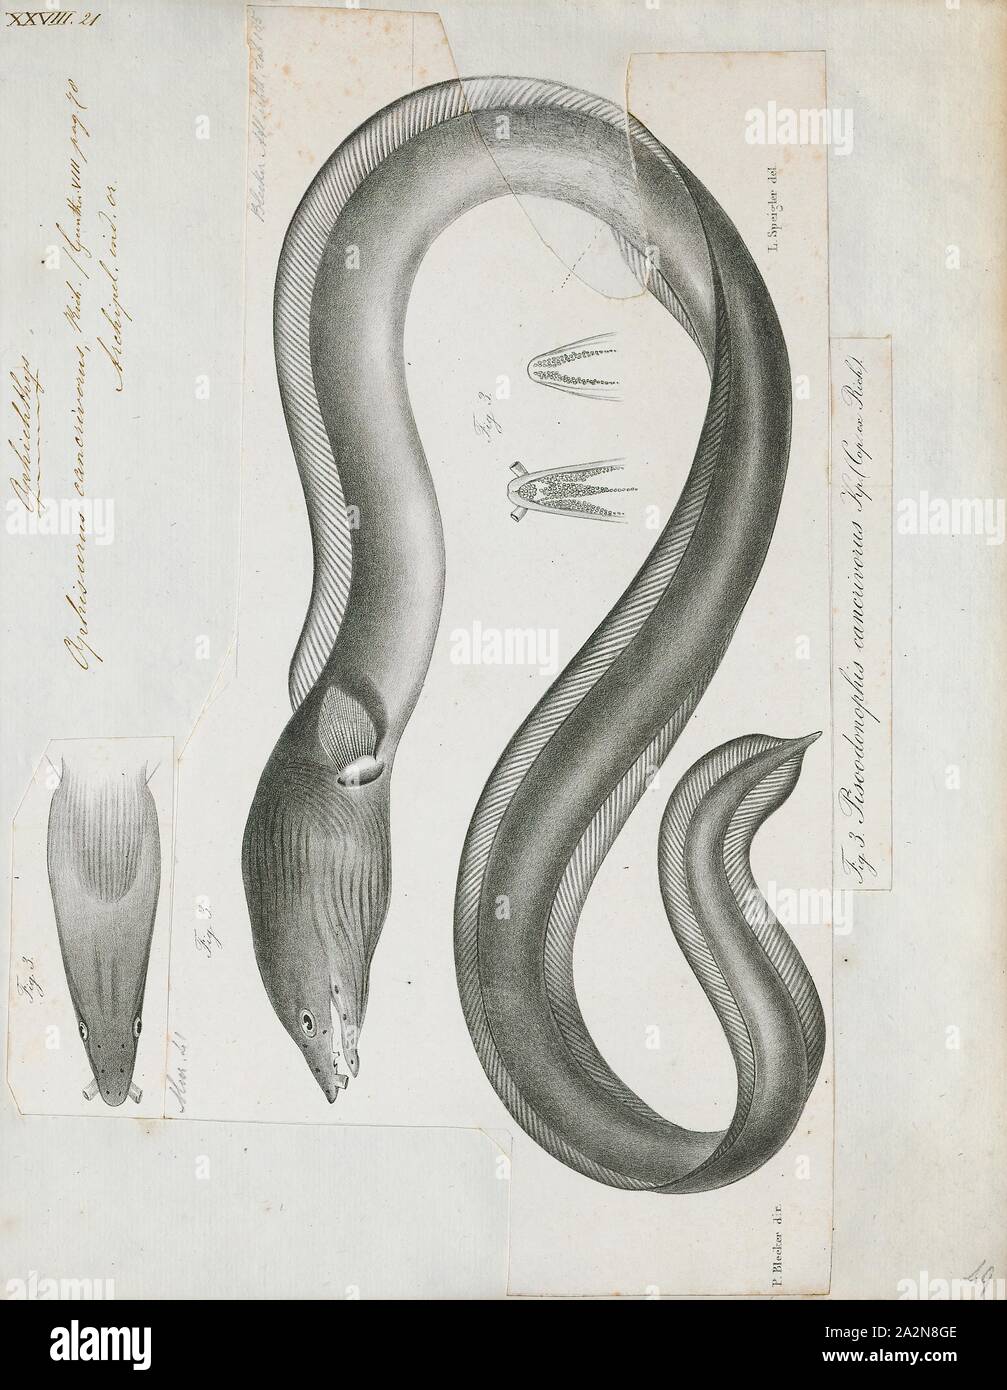 Ophichthys cancrivorus, Print, The longfin snake-eel (Pisodonophis cancrivorus) is an eel in the family Ophichthidae (worm/snake eels). It was described by John Richardson in 1848., 1864 Stock Photo